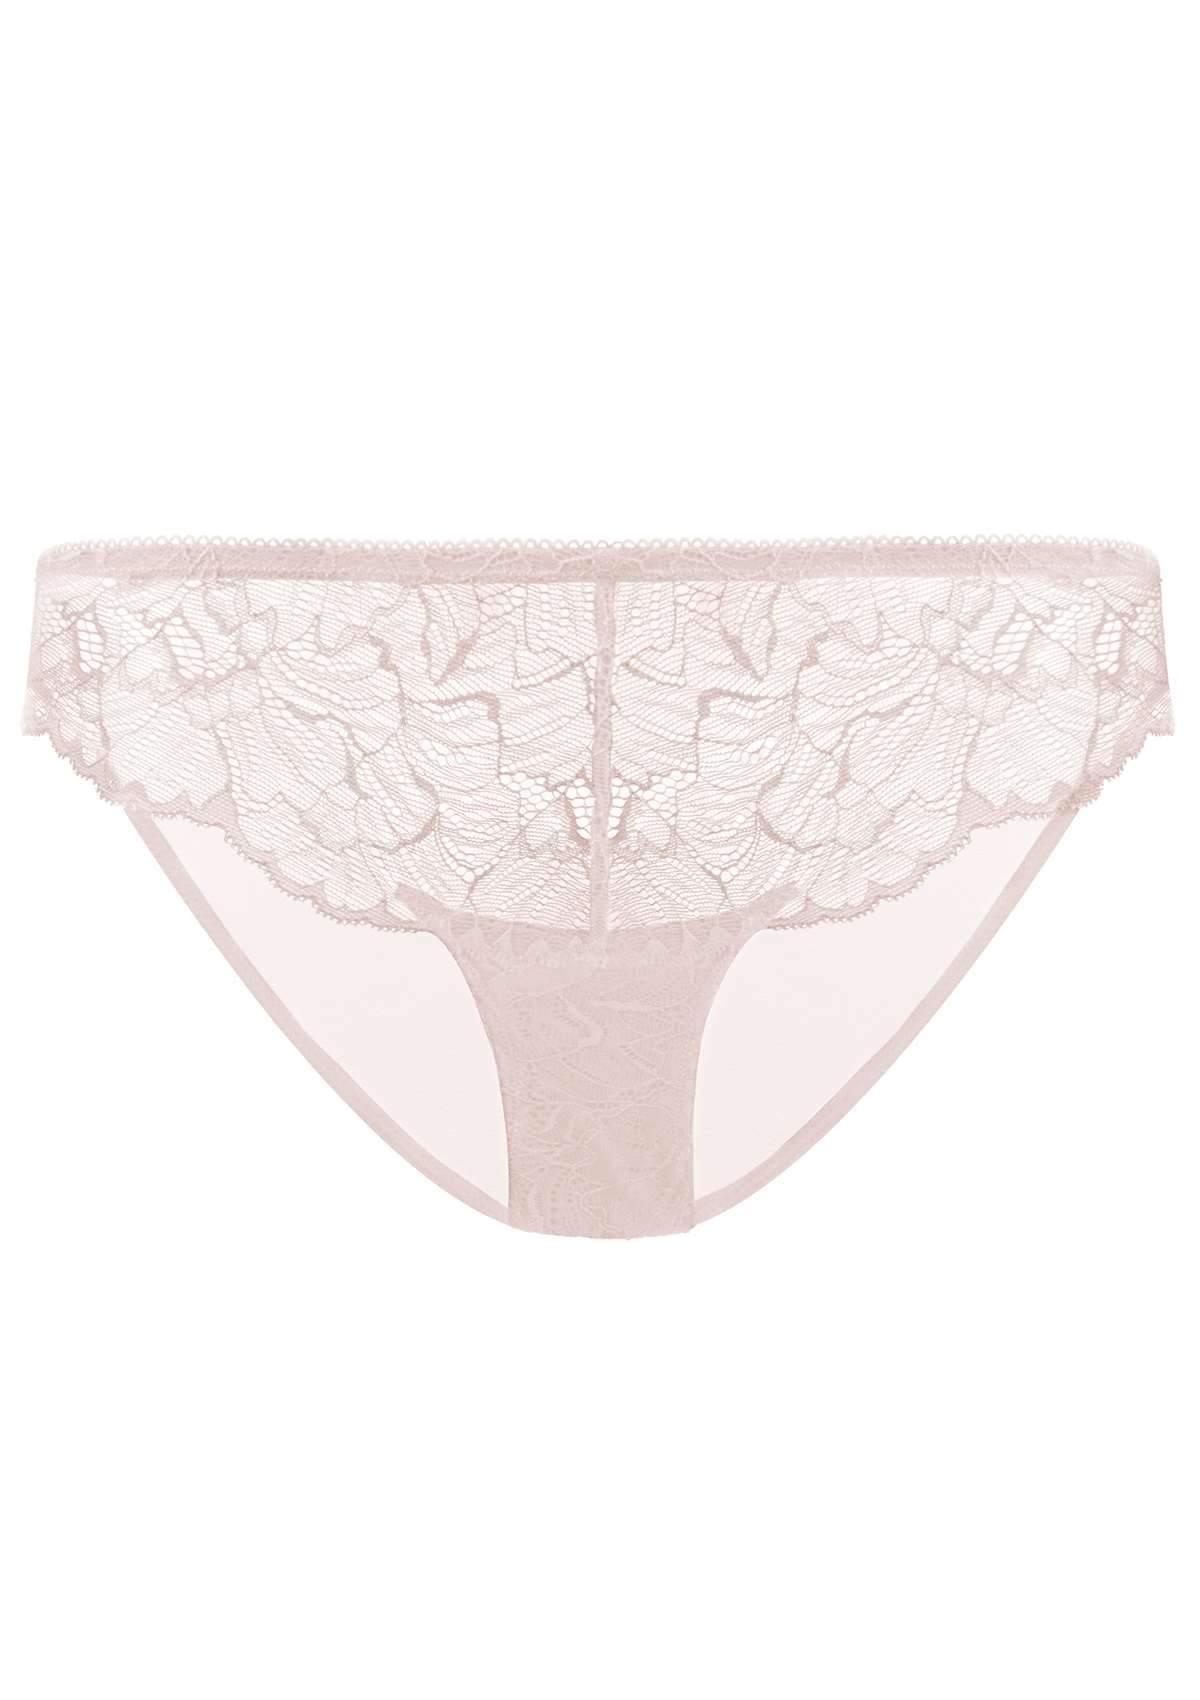 HSIA Blossom Mid-Rise Front Lace Mesh Back Everyday Pantie  - XXXL / Dark Pink / High-Rise Brief